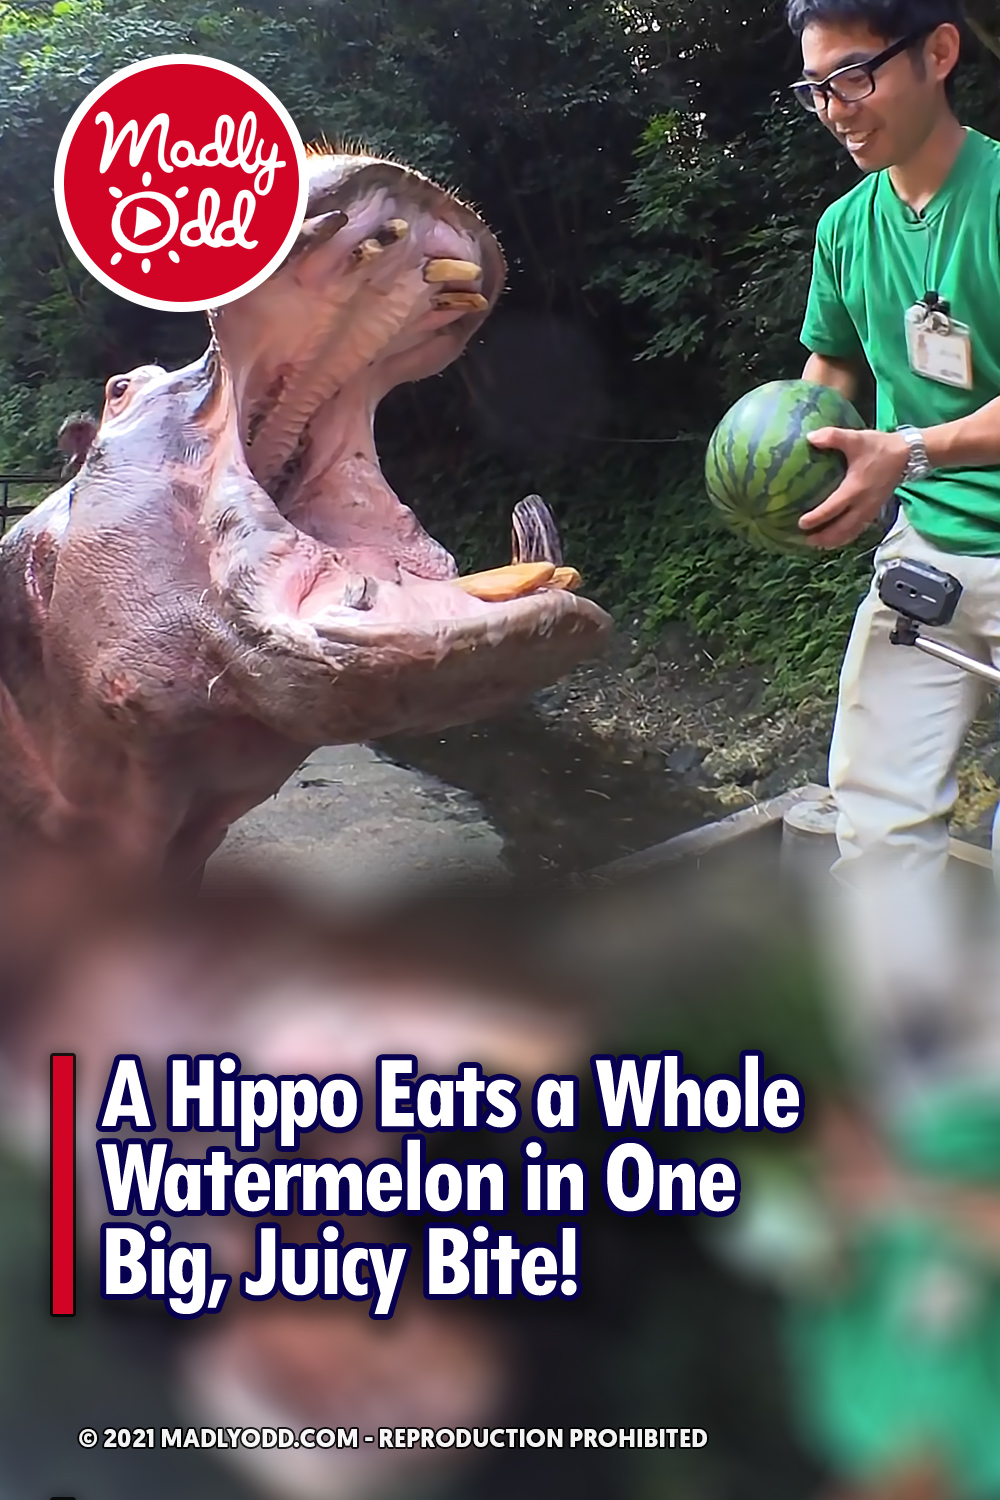 A Hippo Eats a Whole Watermelon in One Big, Juicy Bite!